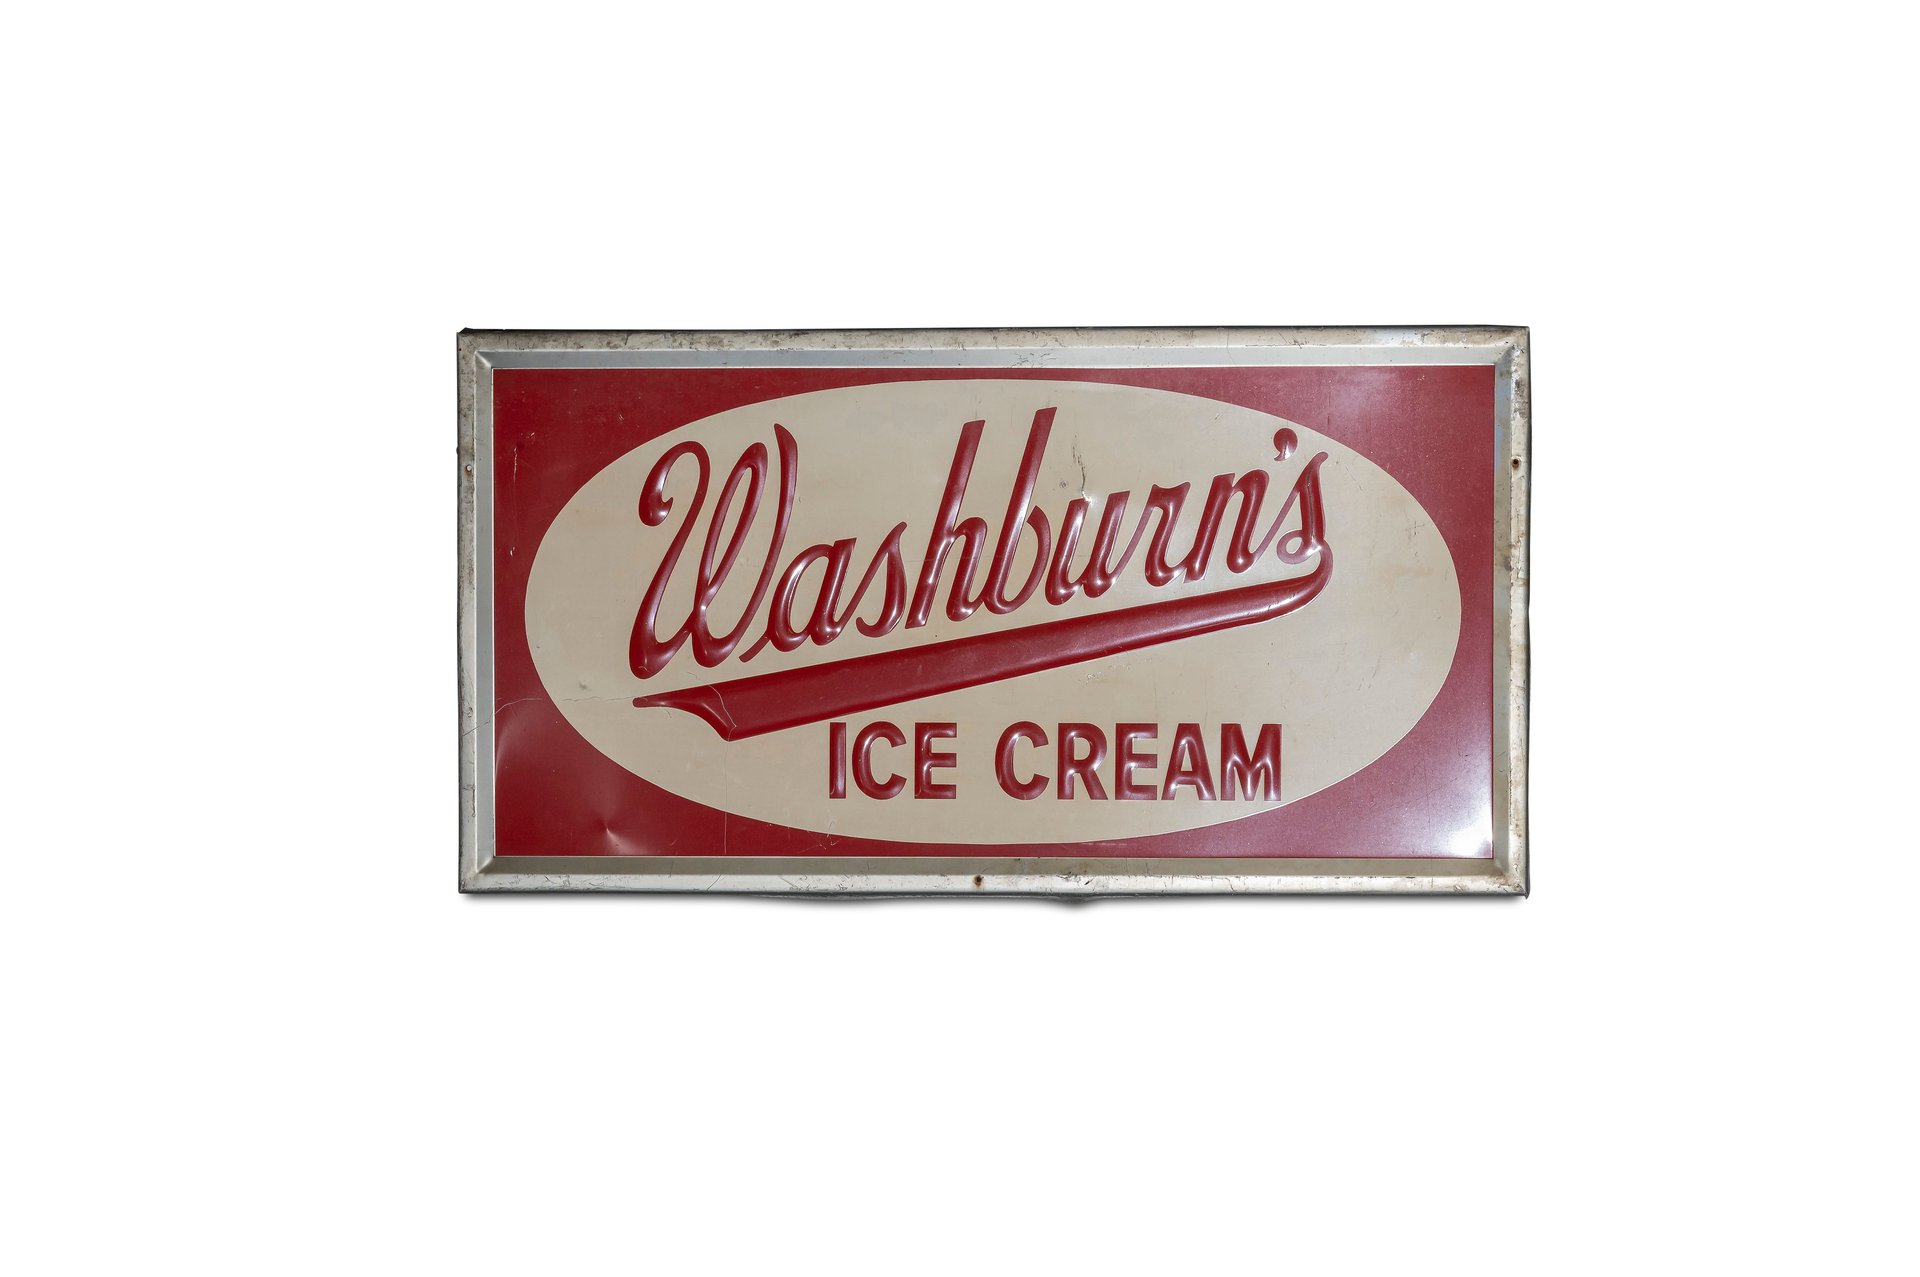 For Sale 'Washburn's Ice Cream' Single Sided Sign